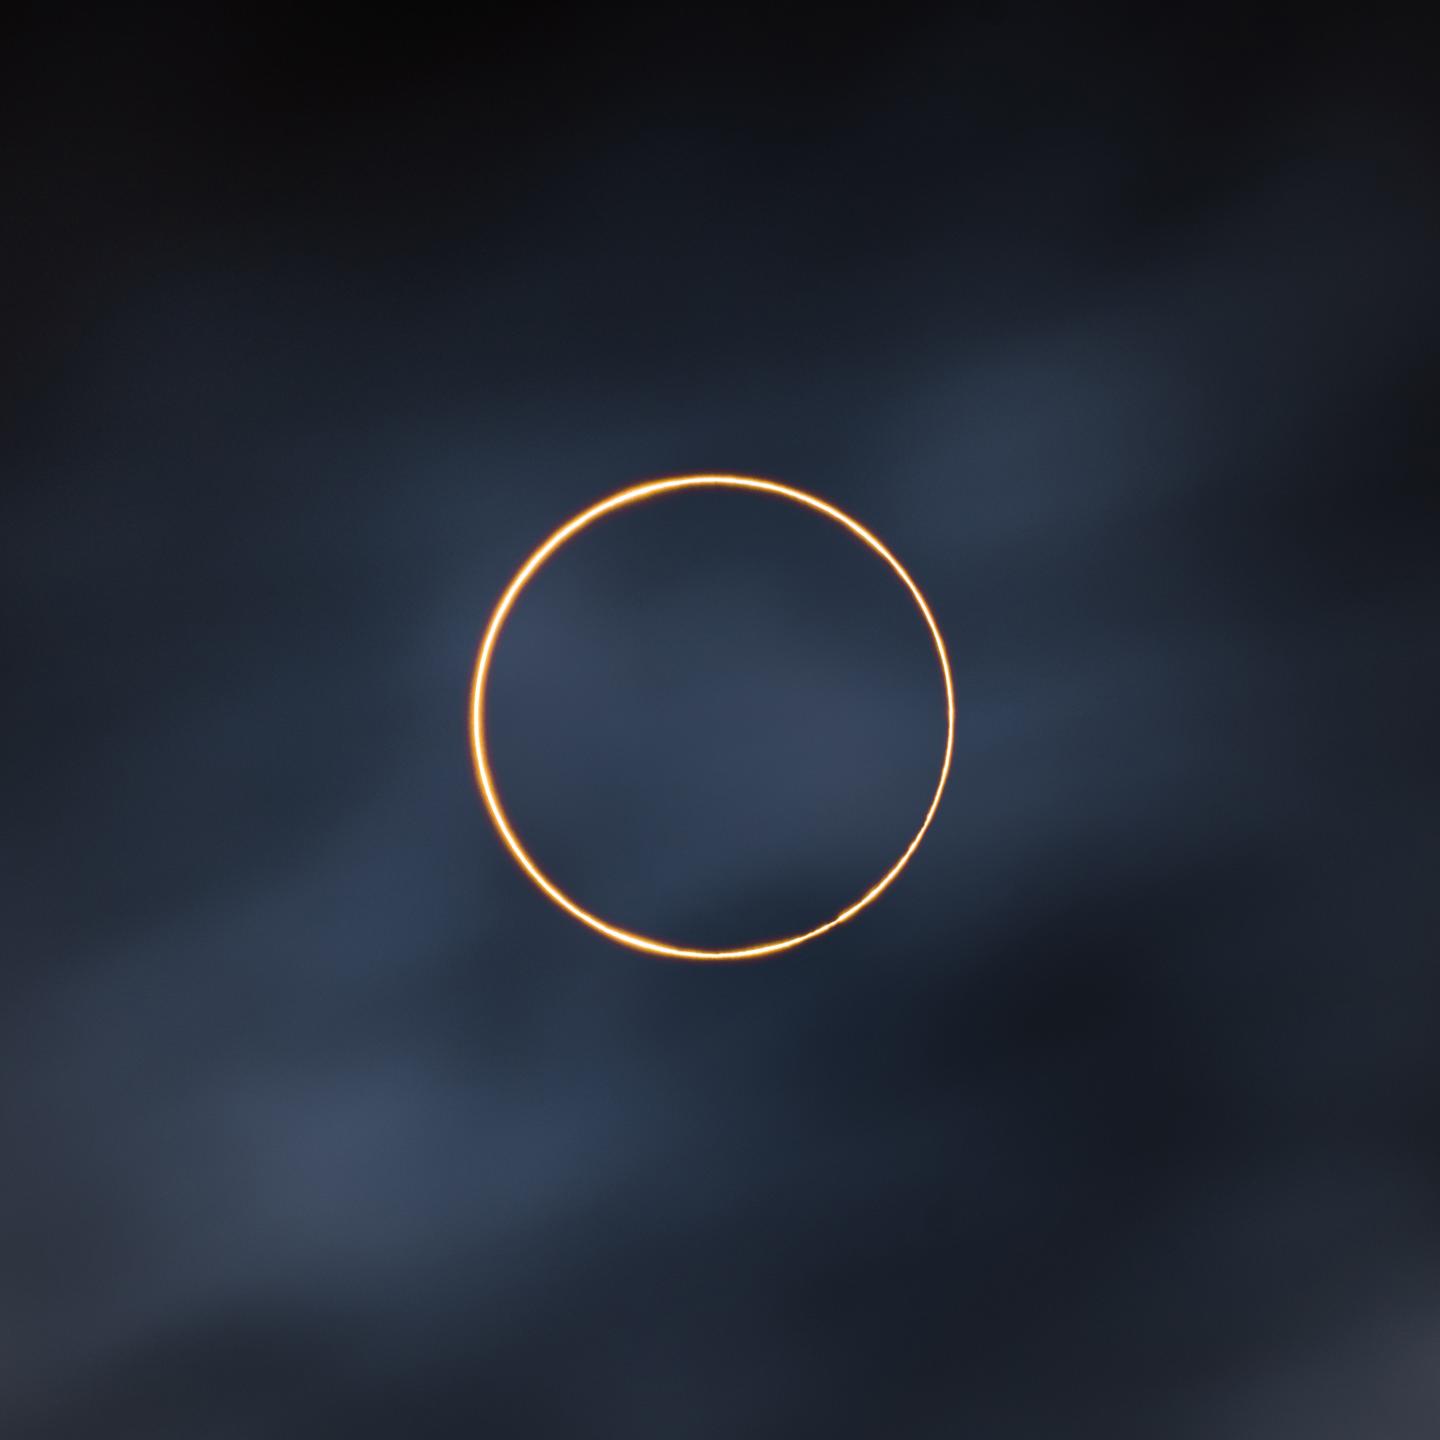 The golden ring of the sun in an annular eclipse